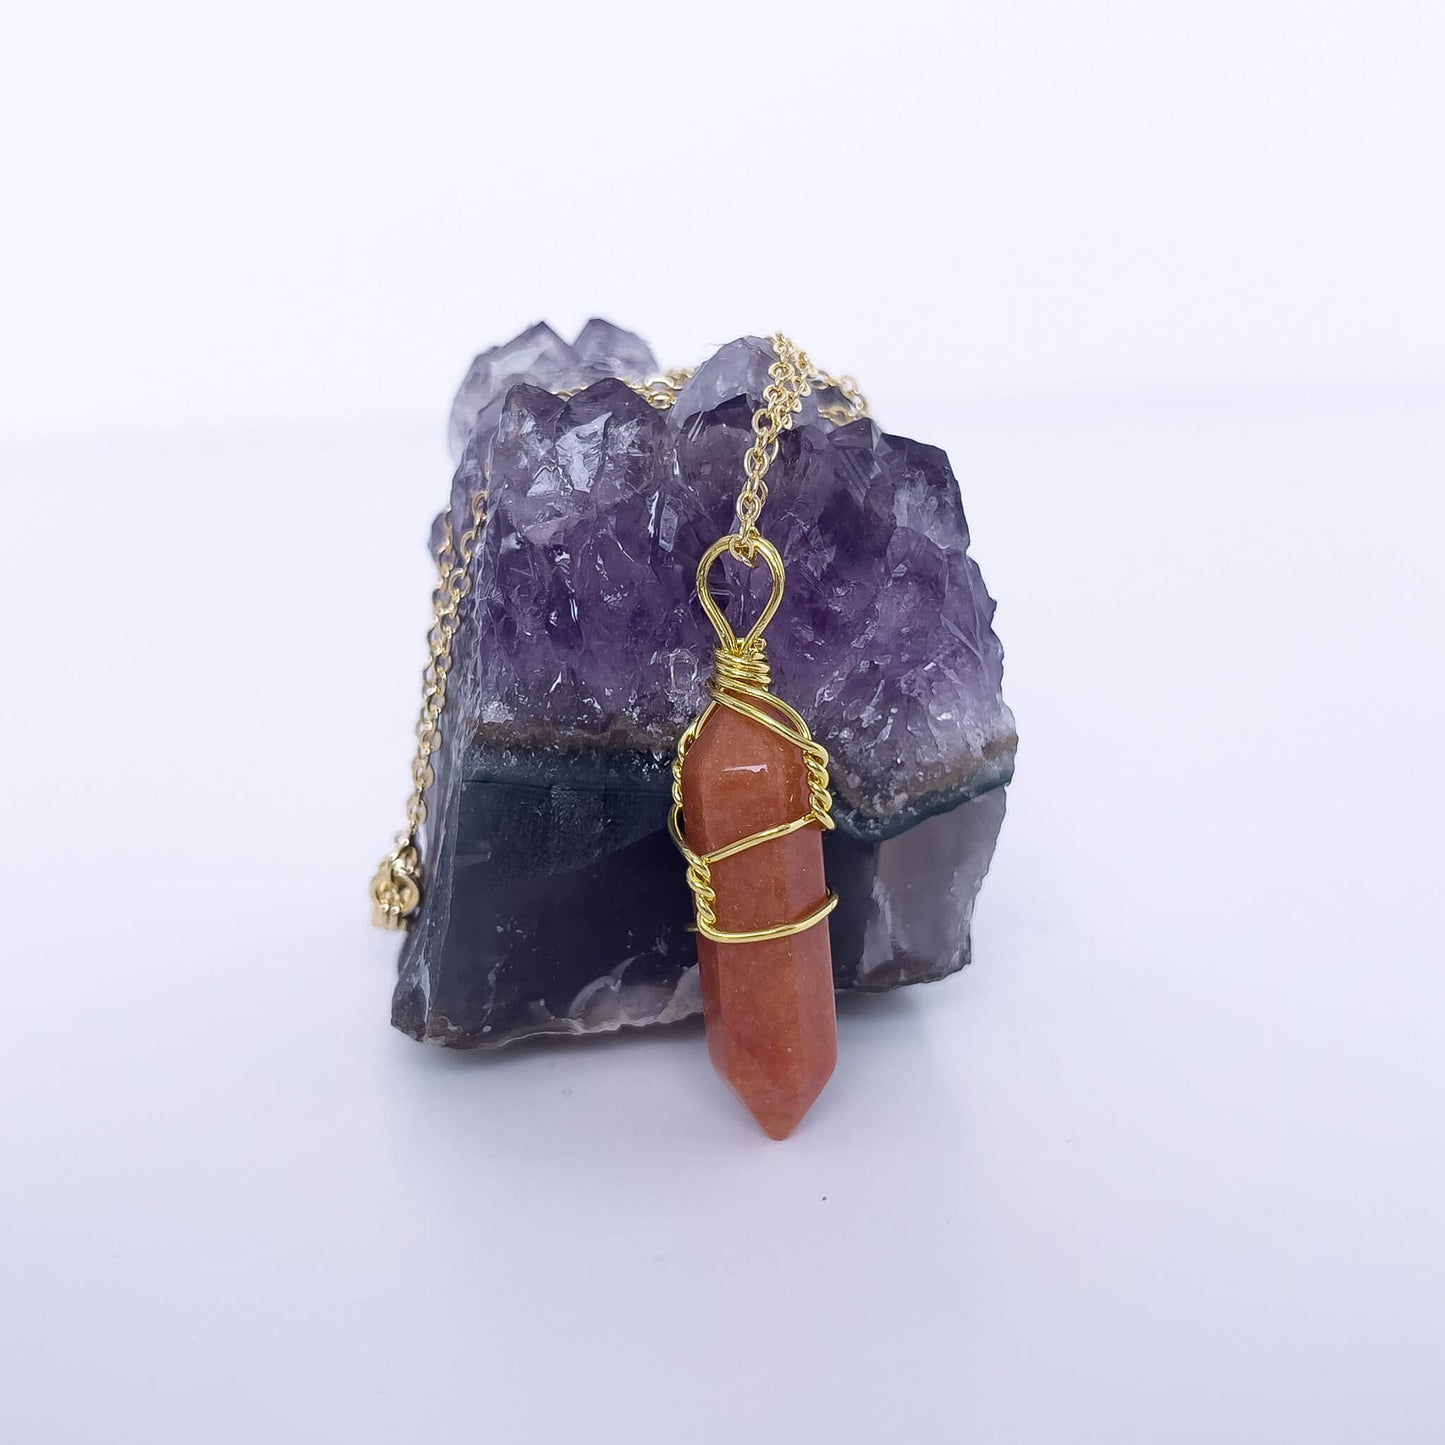 Red Aventurine Natural Healing Stone Pendant Necklace